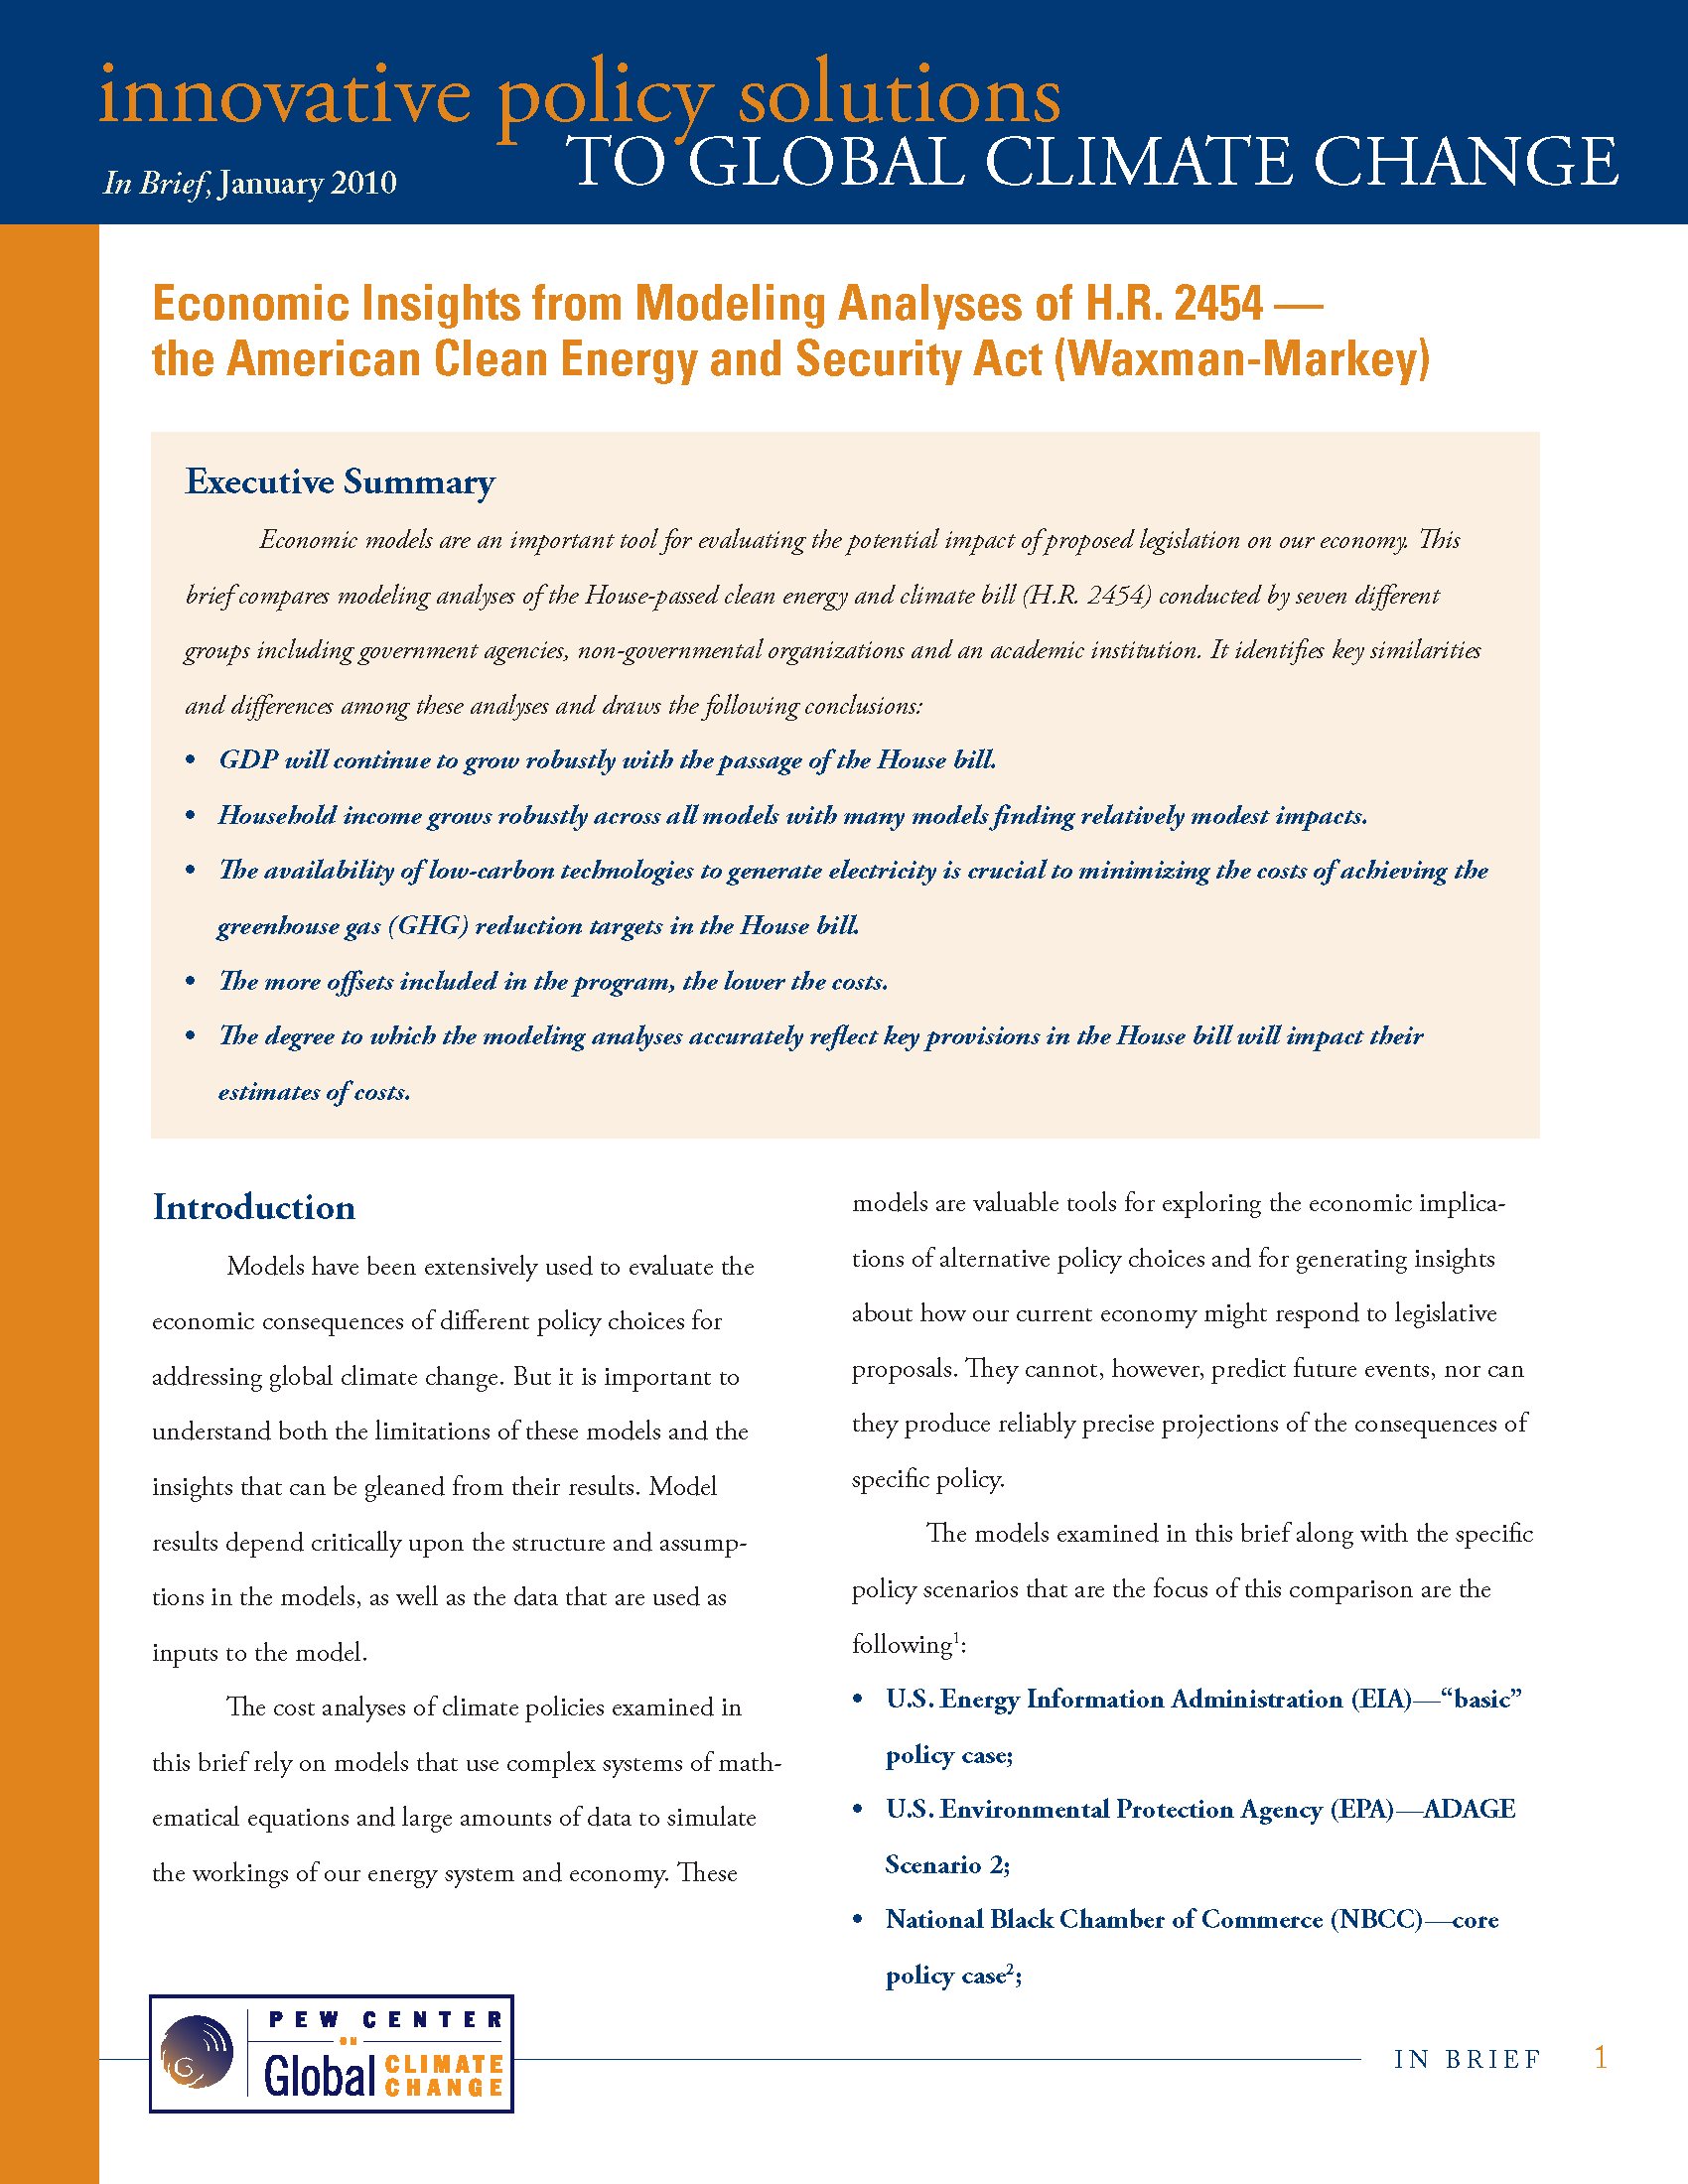 economic-insights-from-modeling-analyses-of-the-american-clean-energy